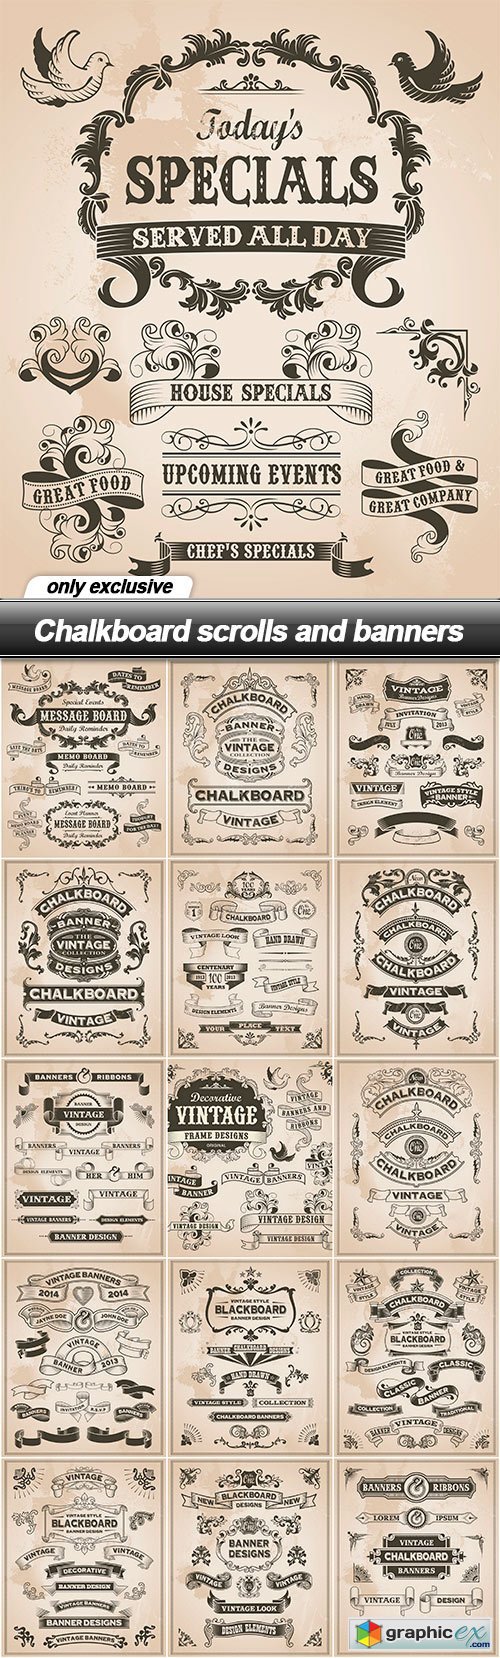 Chalkboard scrolls and banners - 16 EPS